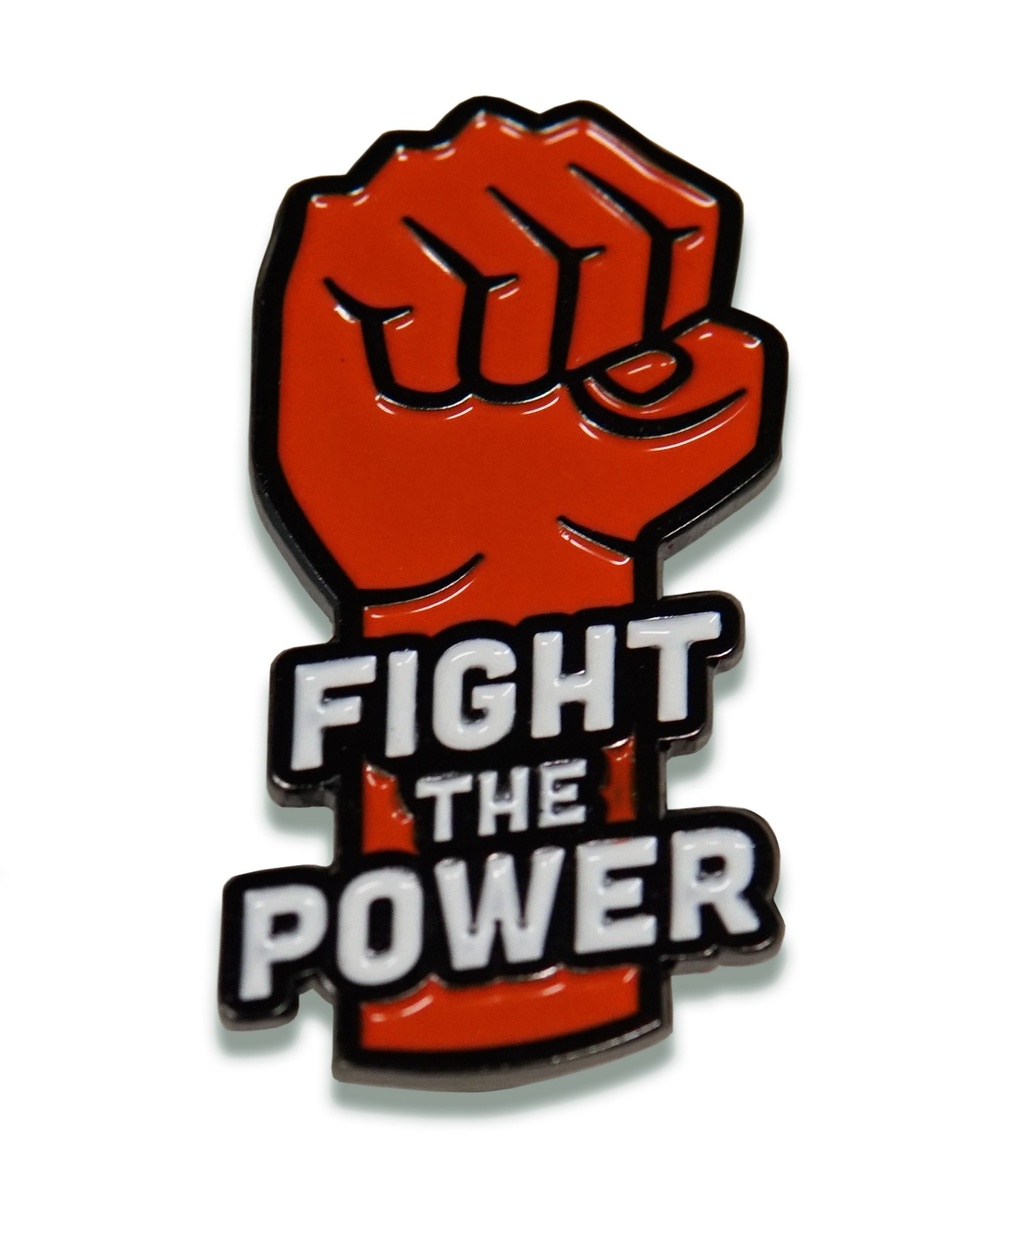 A small red pin shaped like a clenched fist with white text that reads “Fight the Power” overlapping the fist’s wrist.